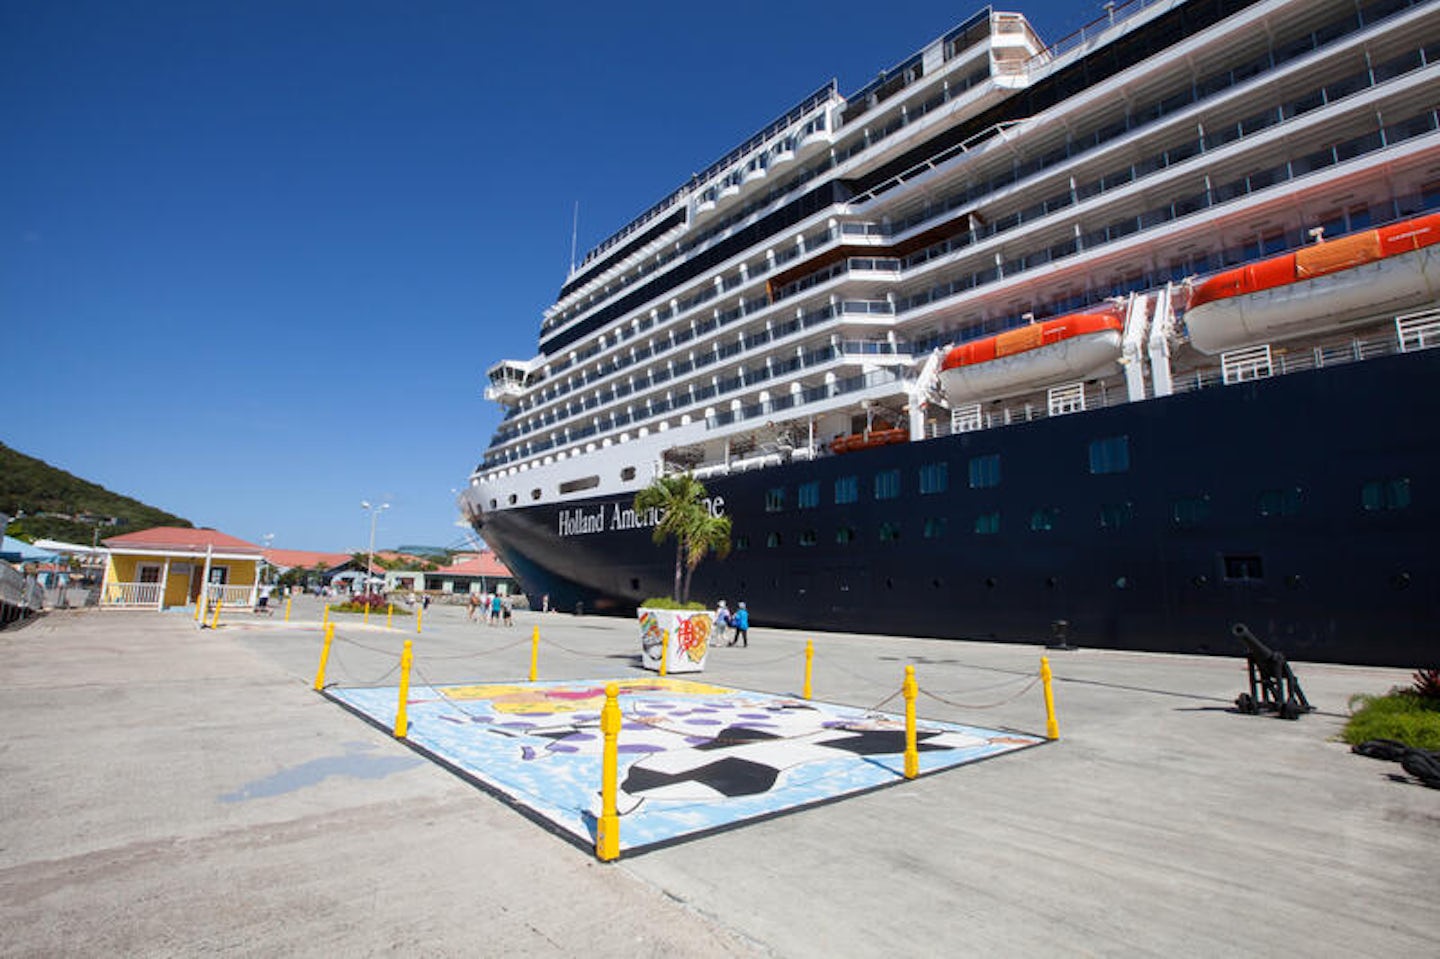 holland america excursions in st thomas